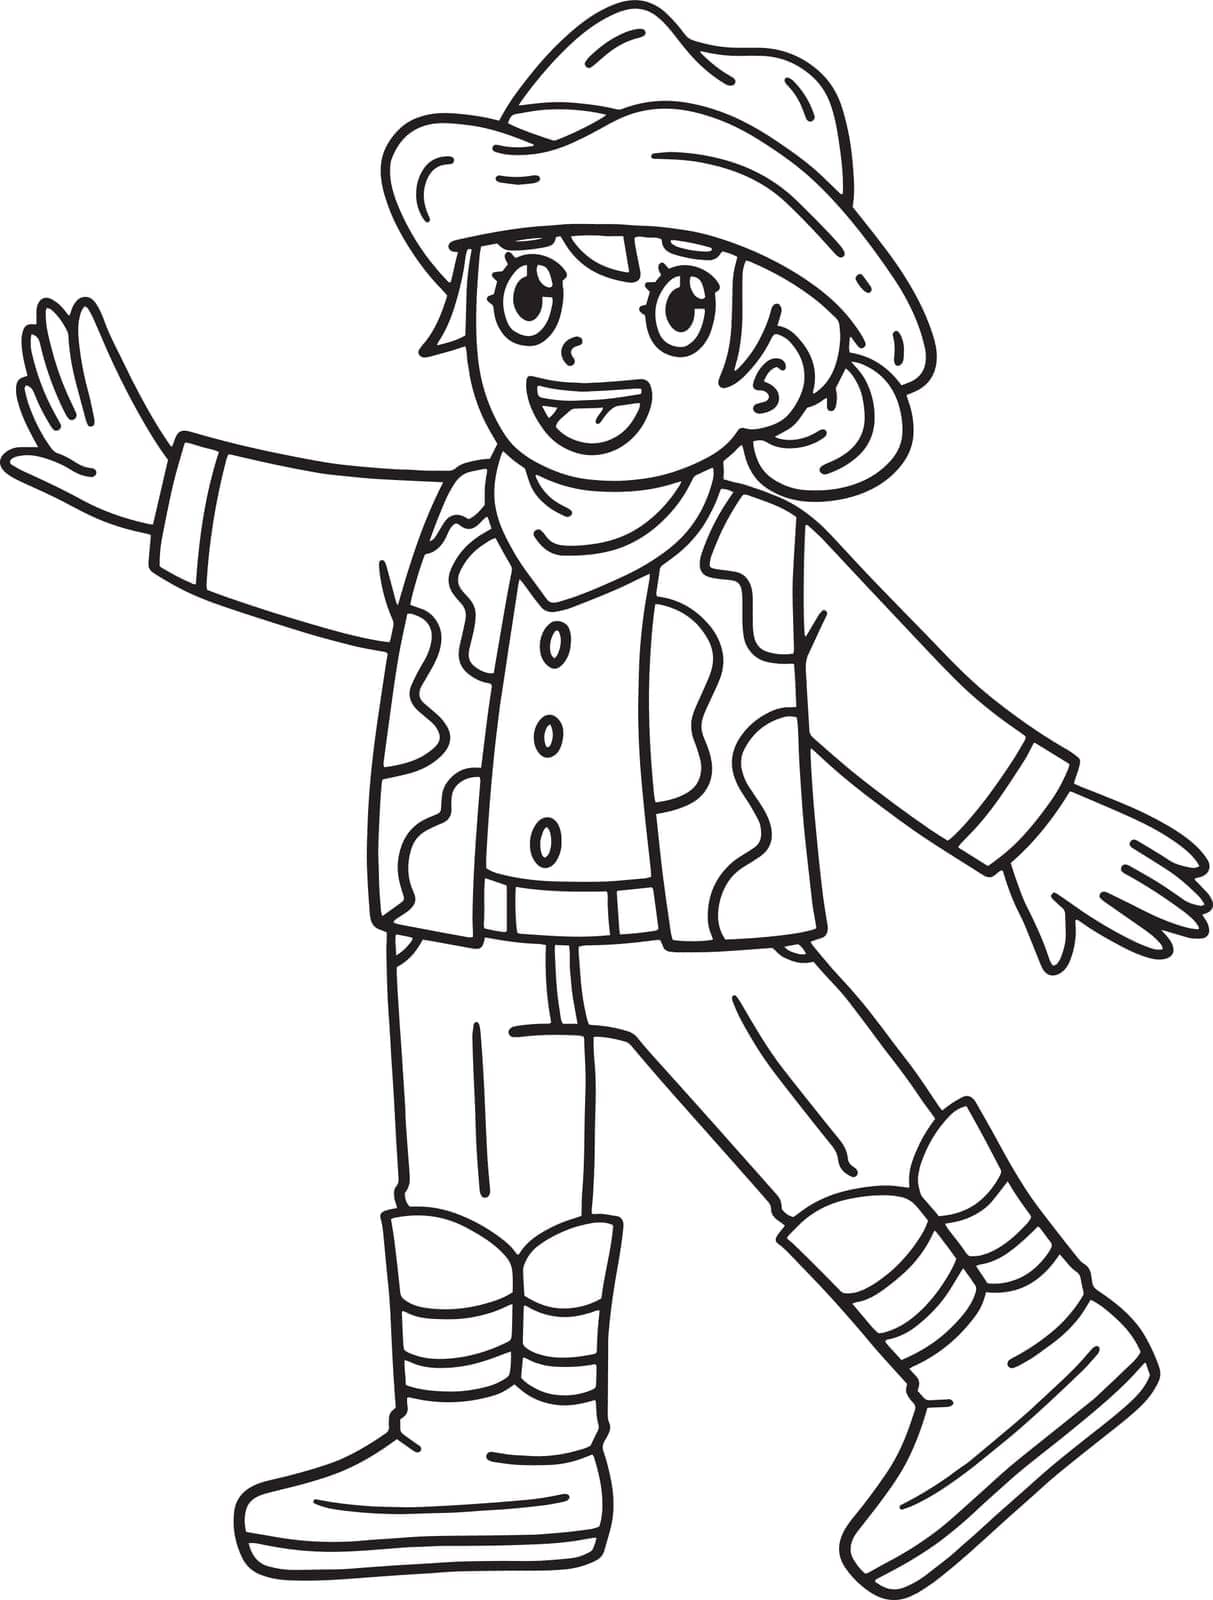 A cute and funny coloring page of a Cowgirl. Provides hours of coloring fun for children. To color, this page is very easy. Suitable for little kids and toddlers.